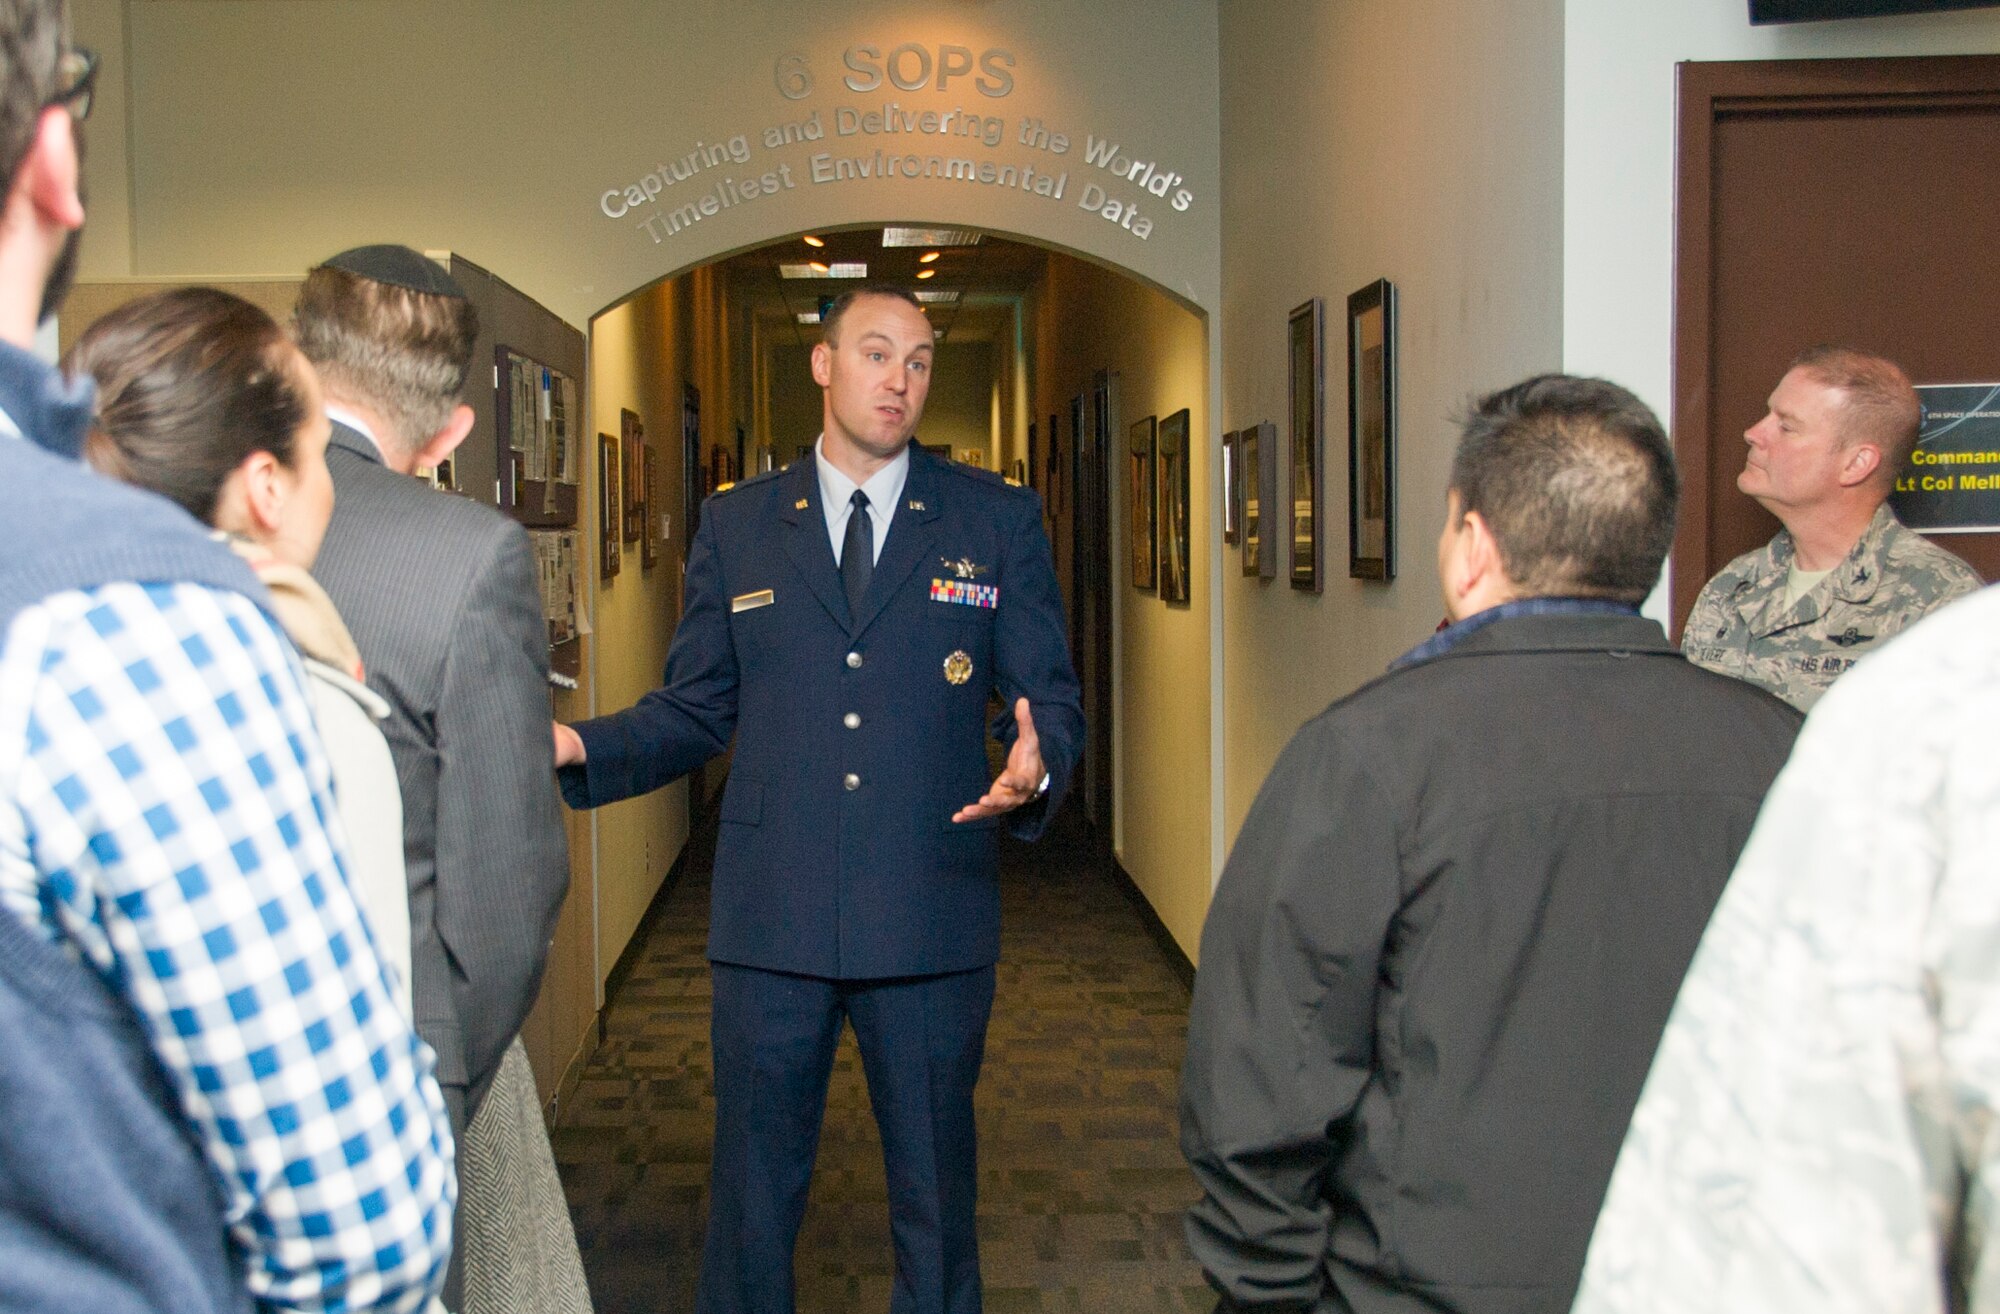 Maj. Joshua Friedman, a 6th Space Operations Squadron mission assurance officer, speaks to Colorado Springs community leaders participating in the 302nd Airlift Wing’s Partners in Leadership Program during a tour of the Air Force Reserve Command’s 310th Space Wing at Schriever Air Force Base, Colo., May 18, 2017. The visit to the 310th SW marks the second of four planned events with Air Force Reserve units. The Partners in Leadership program aims to provide educational experiences to community leaders on Air Force Reserve missions performed in the Pikes Peak region.  (U.S. Air Force photo/Senior Airman Laura Turner) 